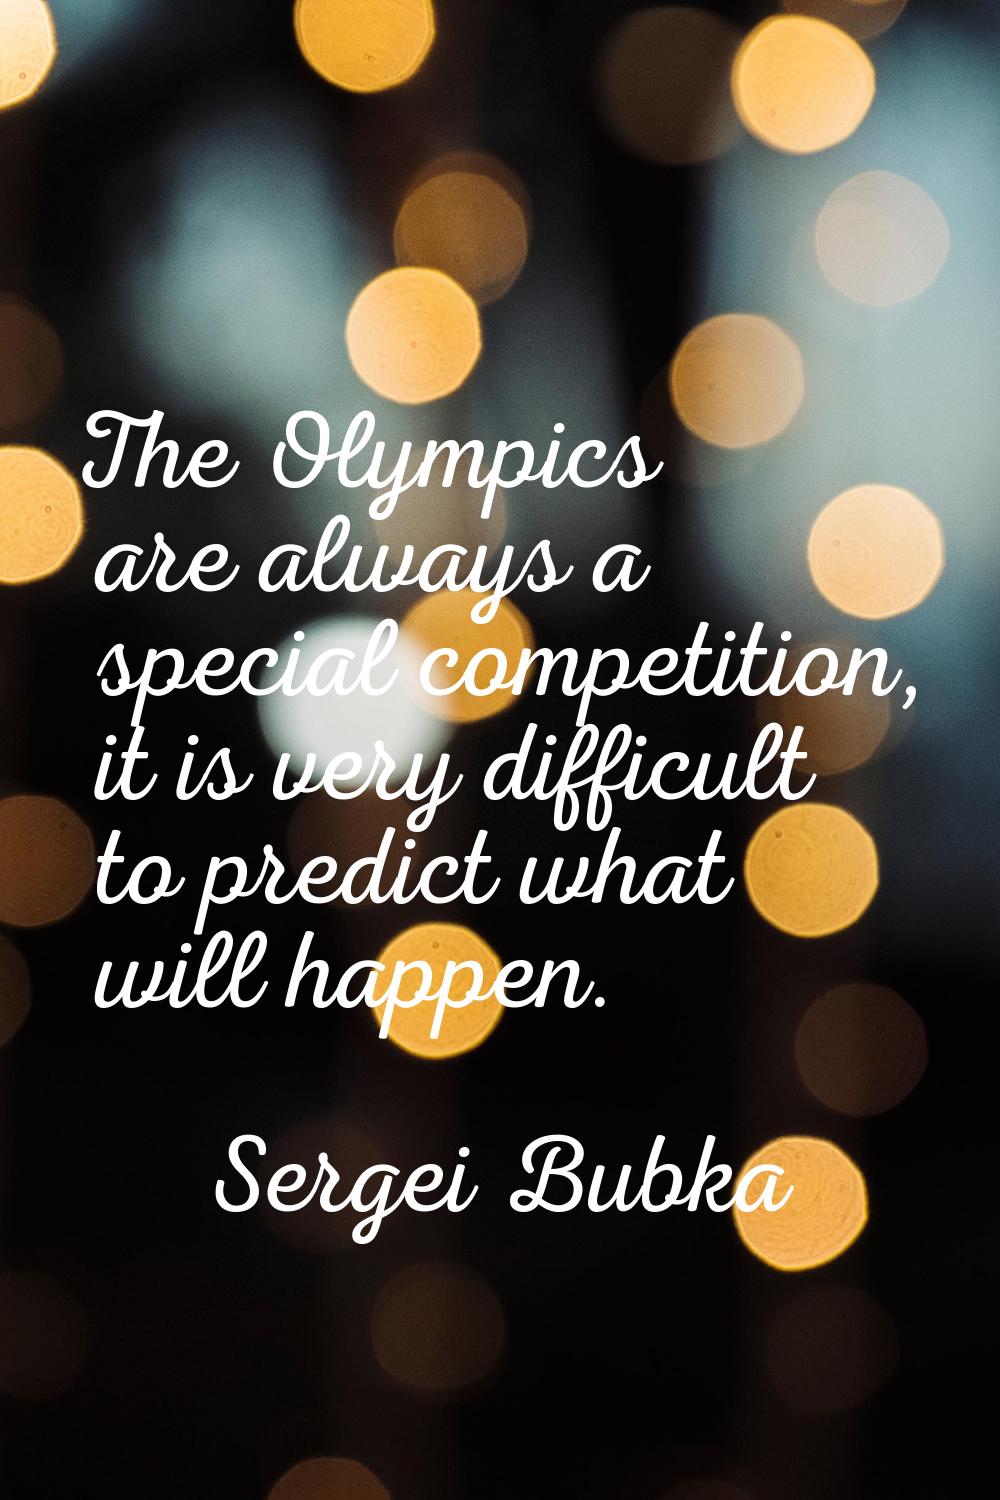 The Olympics are always a special competition, it is very difficult to predict what will happen.